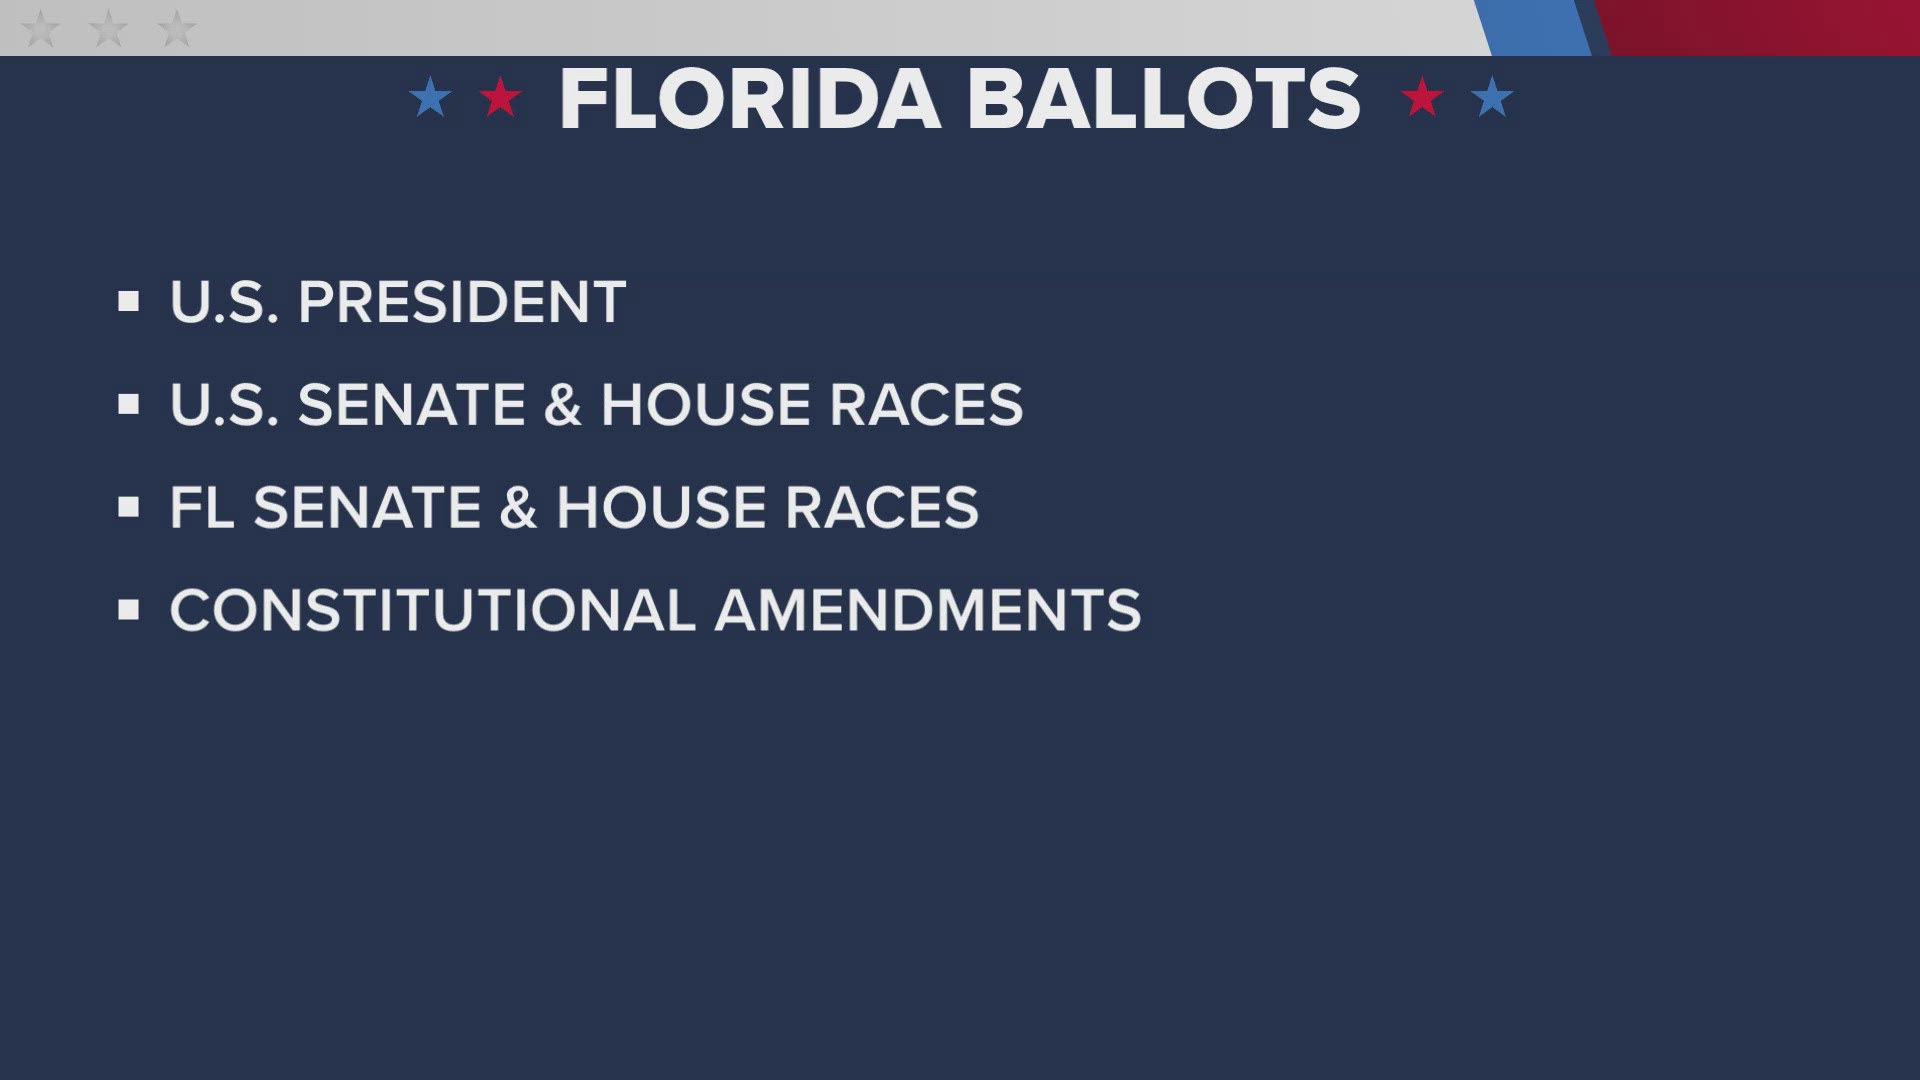 In Florida, a U.S. Senate seat will be up for vote, as well as Florida Senate and House seats, & 6 constitutional amendments. In Georgia, U.S. House seats will be up